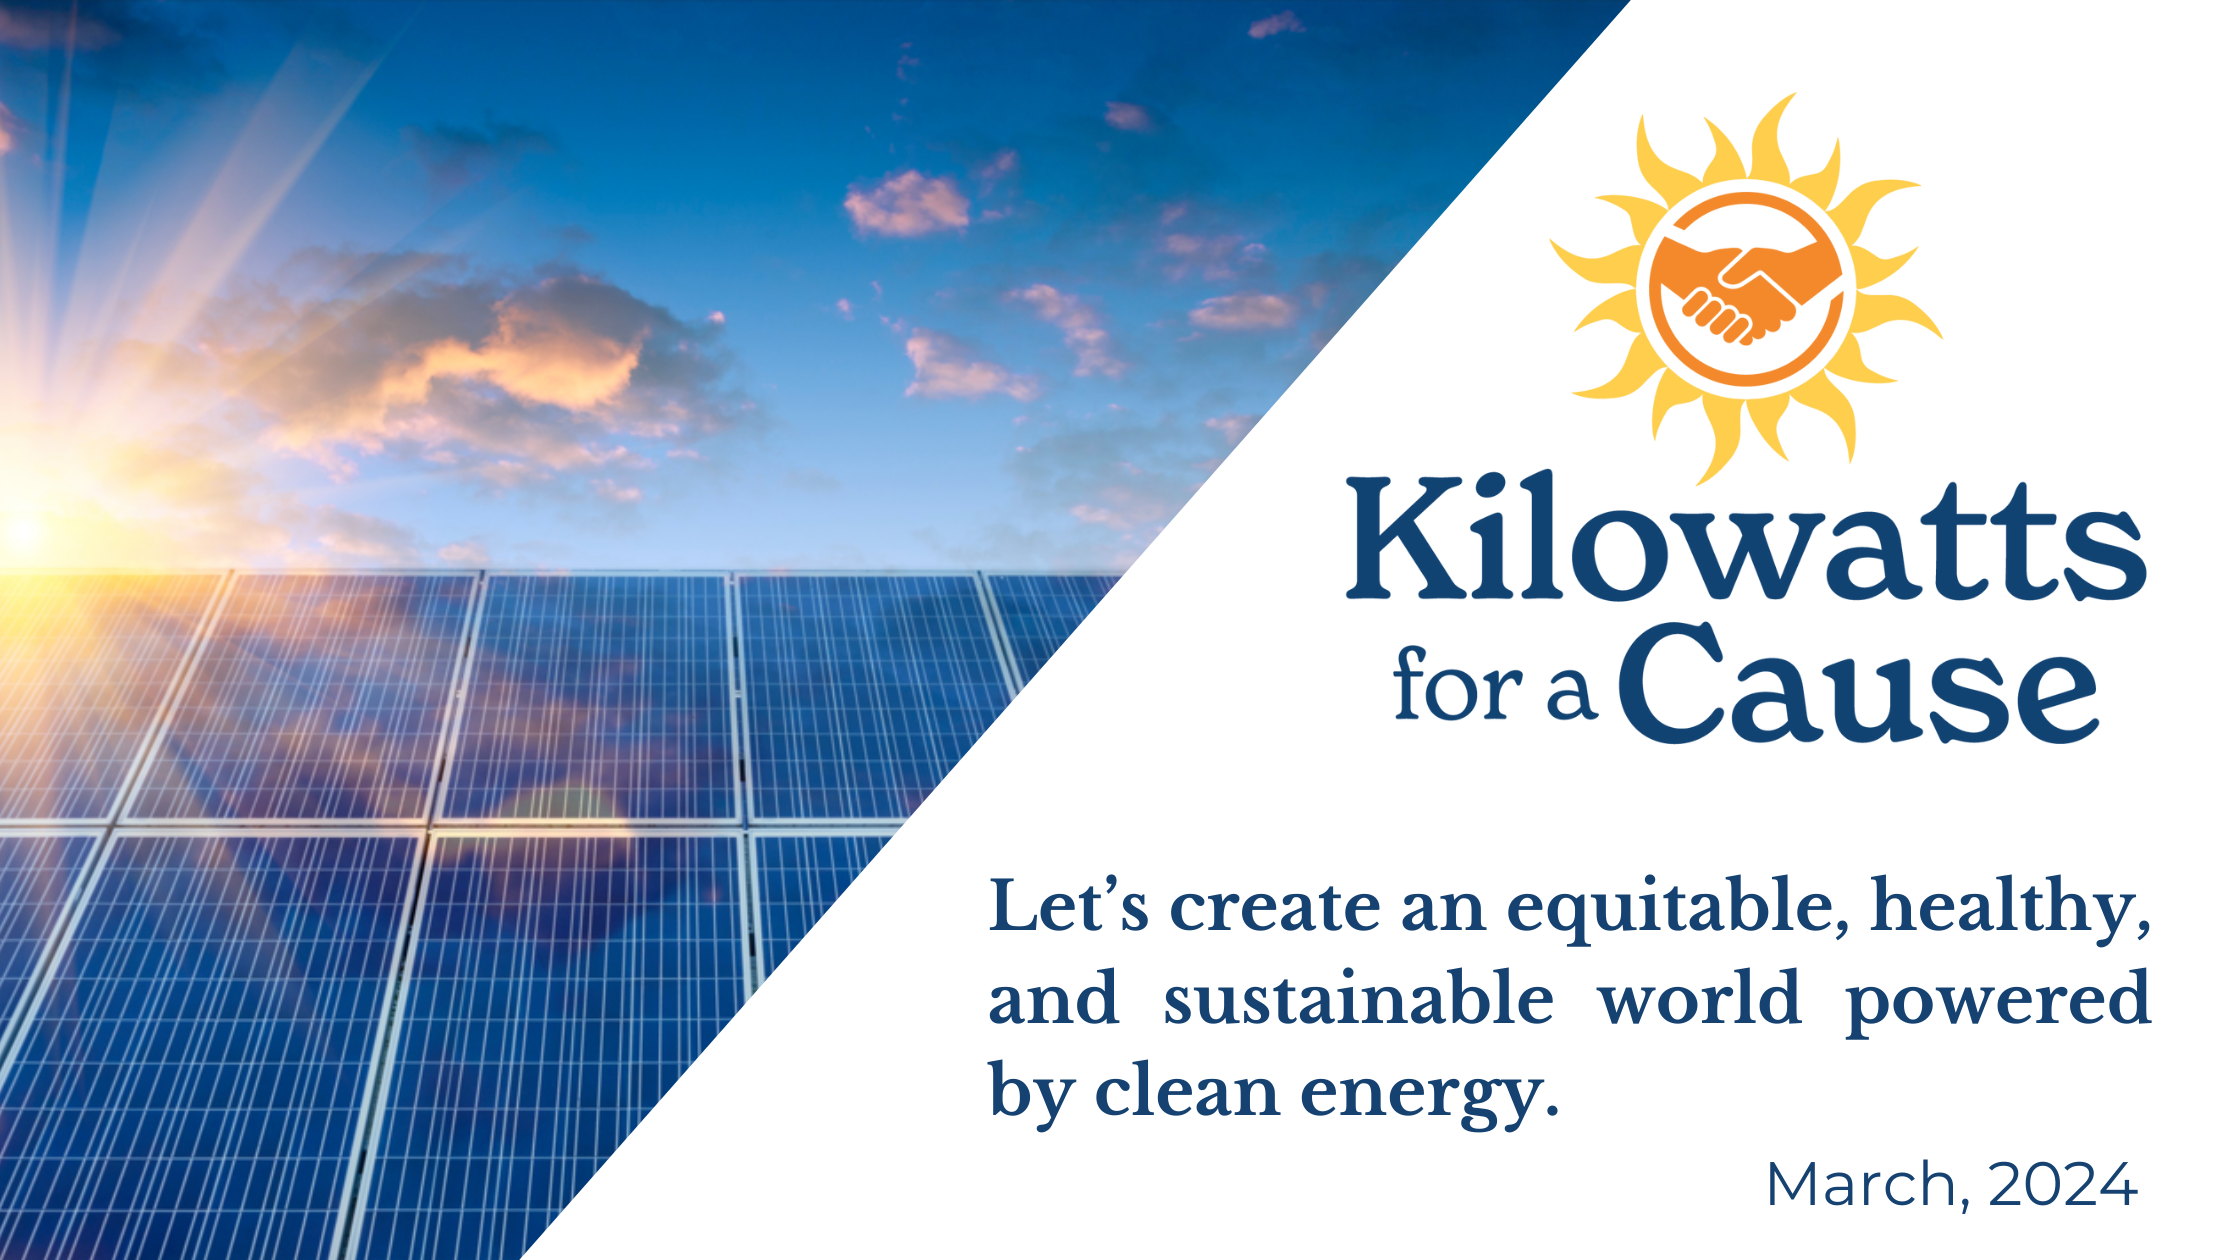 Kilowatts for a Cause: Let's create an equitable, healthy, and sustainable world powered by clean energy.